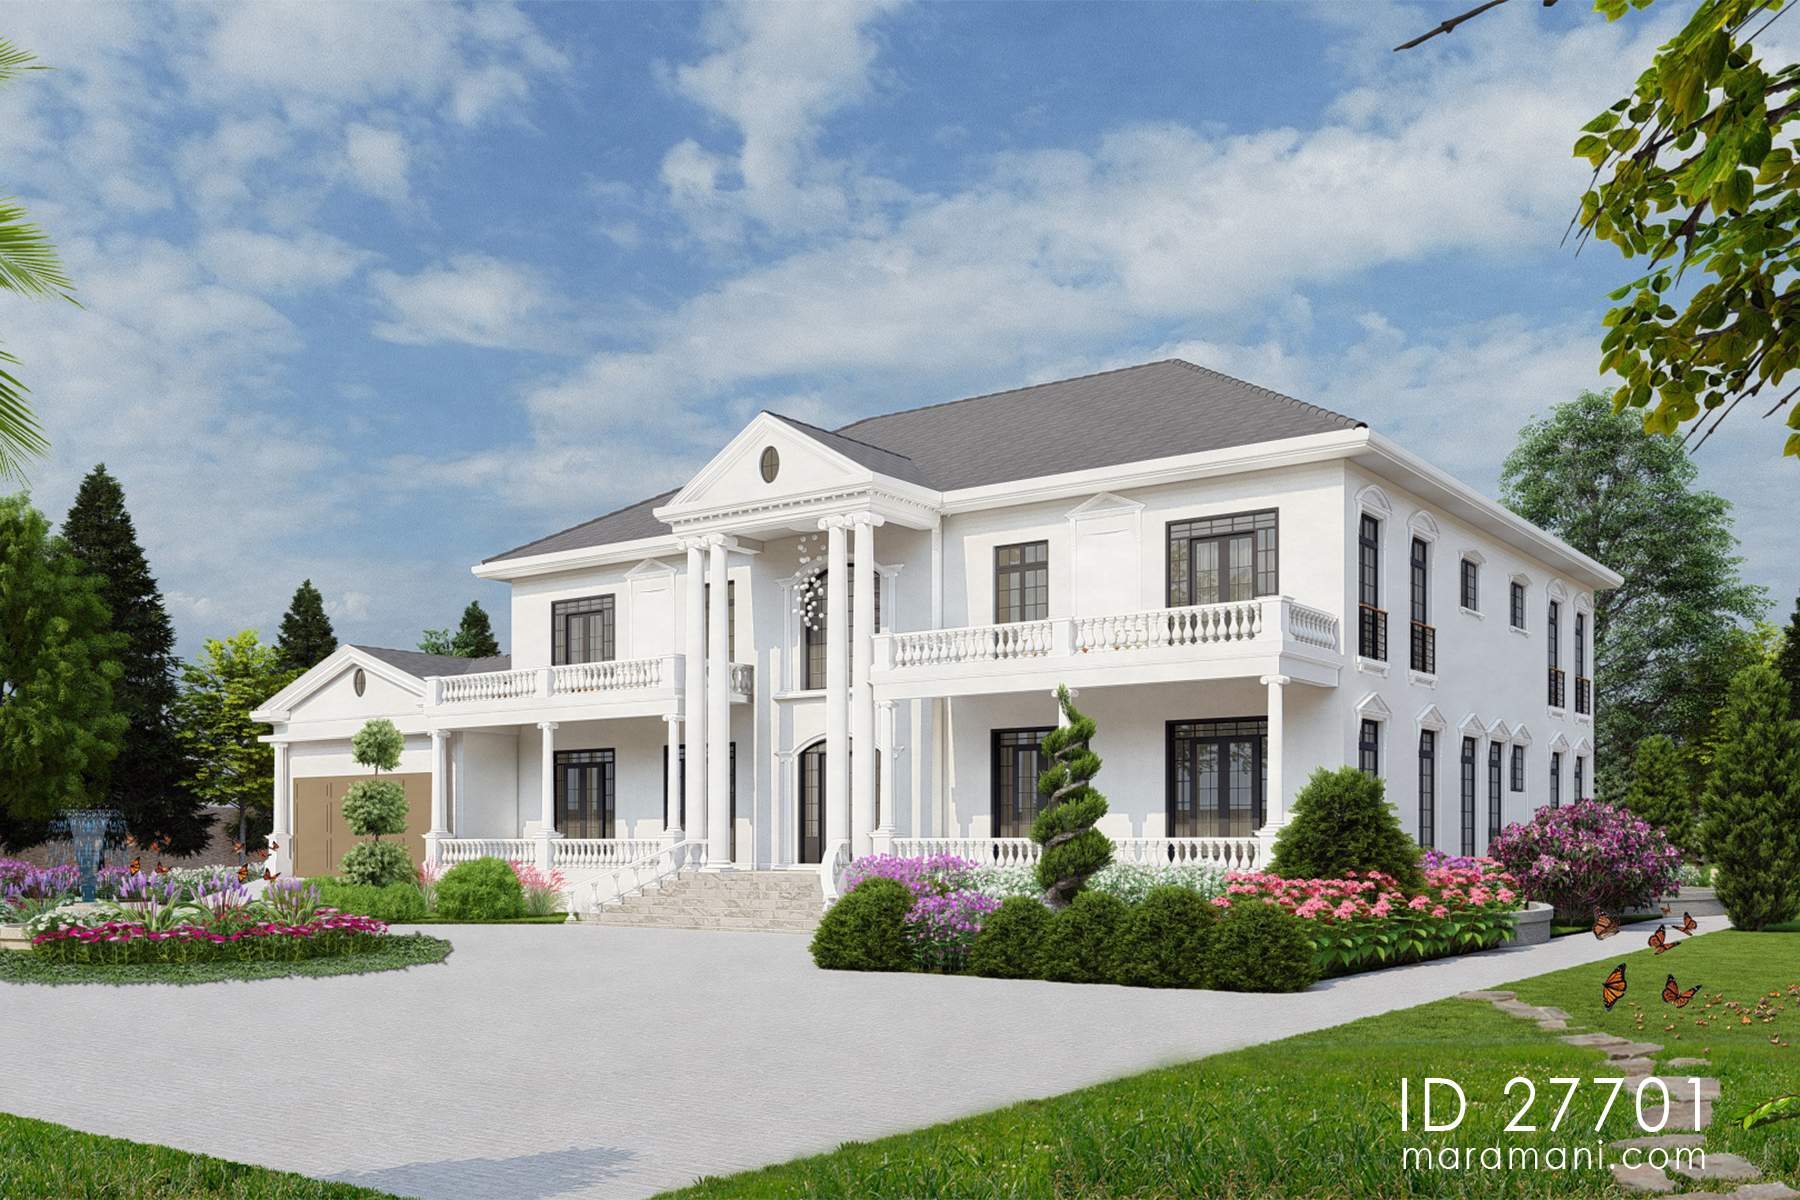 Modern 7 bedroom classical house - ID 27701 House design by Maramani